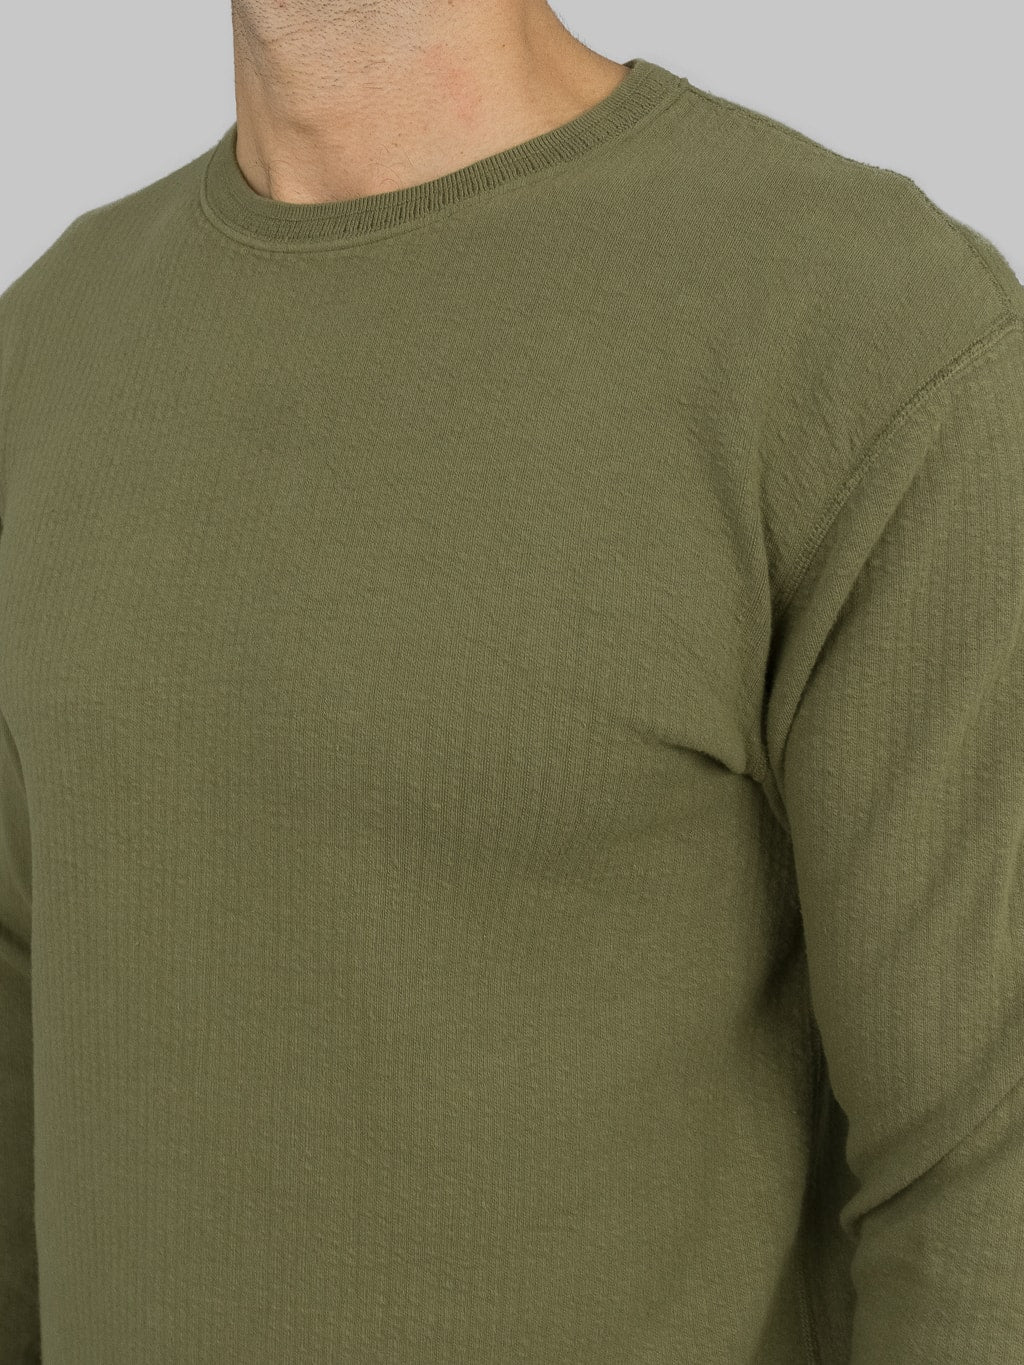 Loop Weft Double Face Jacquard crewneck Thermal army olive collar